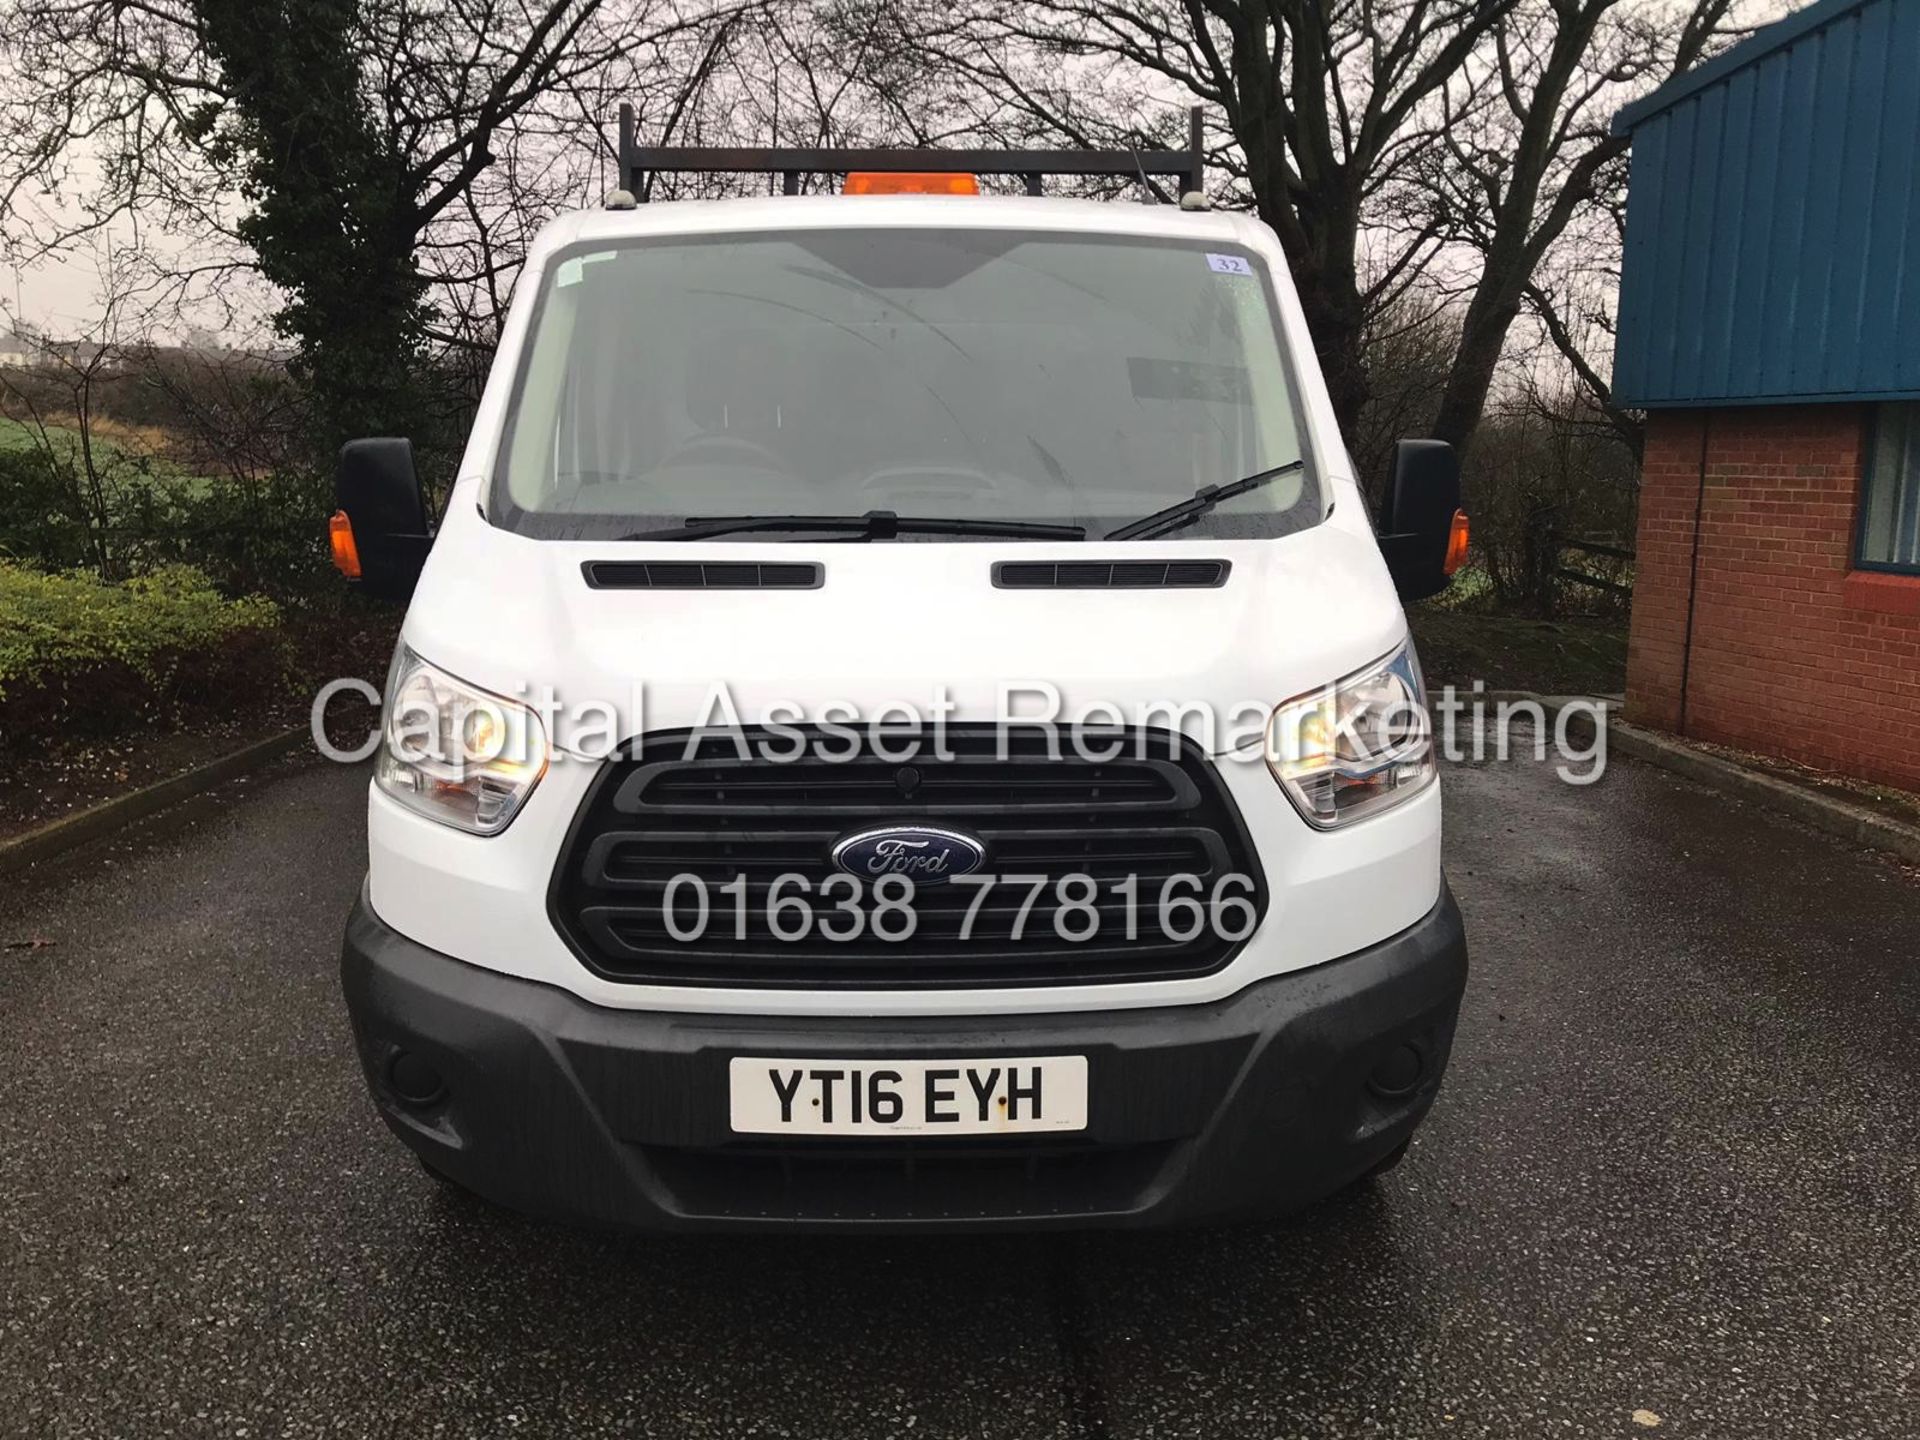 FORD TRANSIT 2.2TDCI "125" T350 D/C TIPPER (16 REG - NEW SHAPE) 1 OWNER ONLY 54K FROM NEW - Image 2 of 17